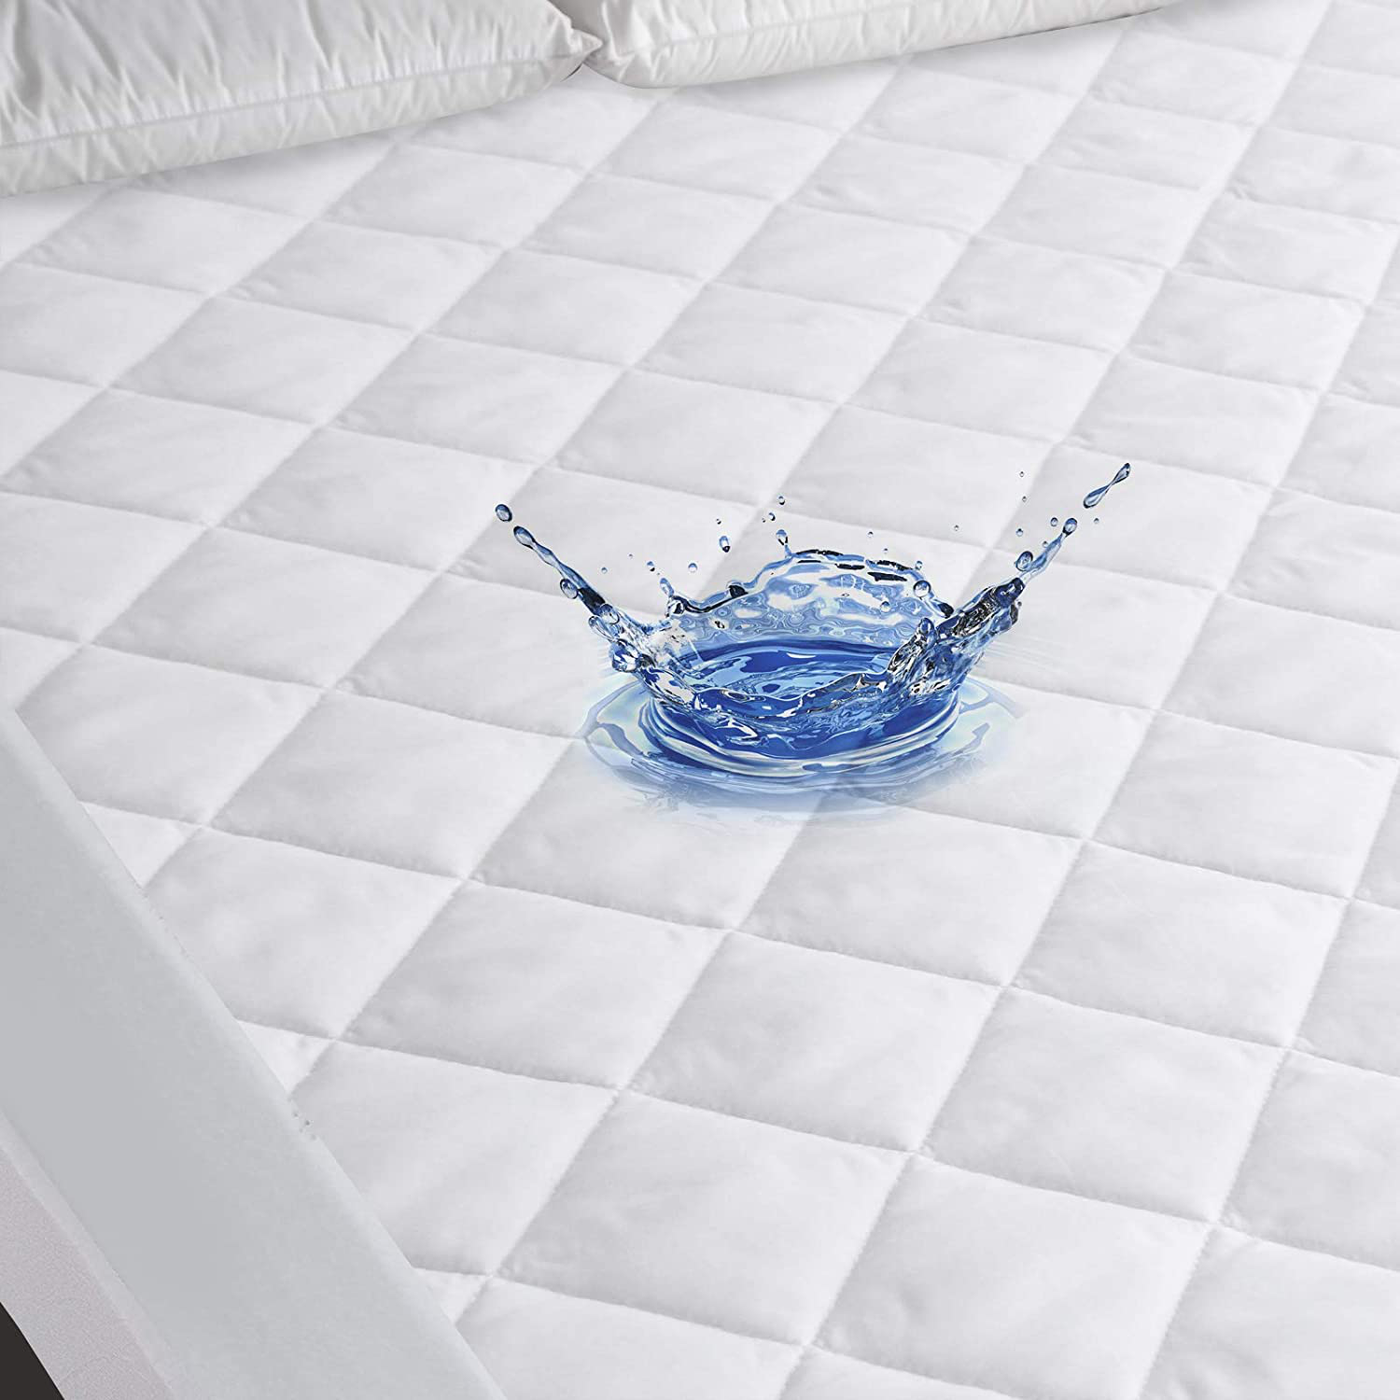 Full XL Mattress Pad Waterproof Mattress Protector, Breathable Quilted Mattress Protector, Durable Mattress Cover Down Alternative Filling with Deep Pocket Stretches up to 14 Inch